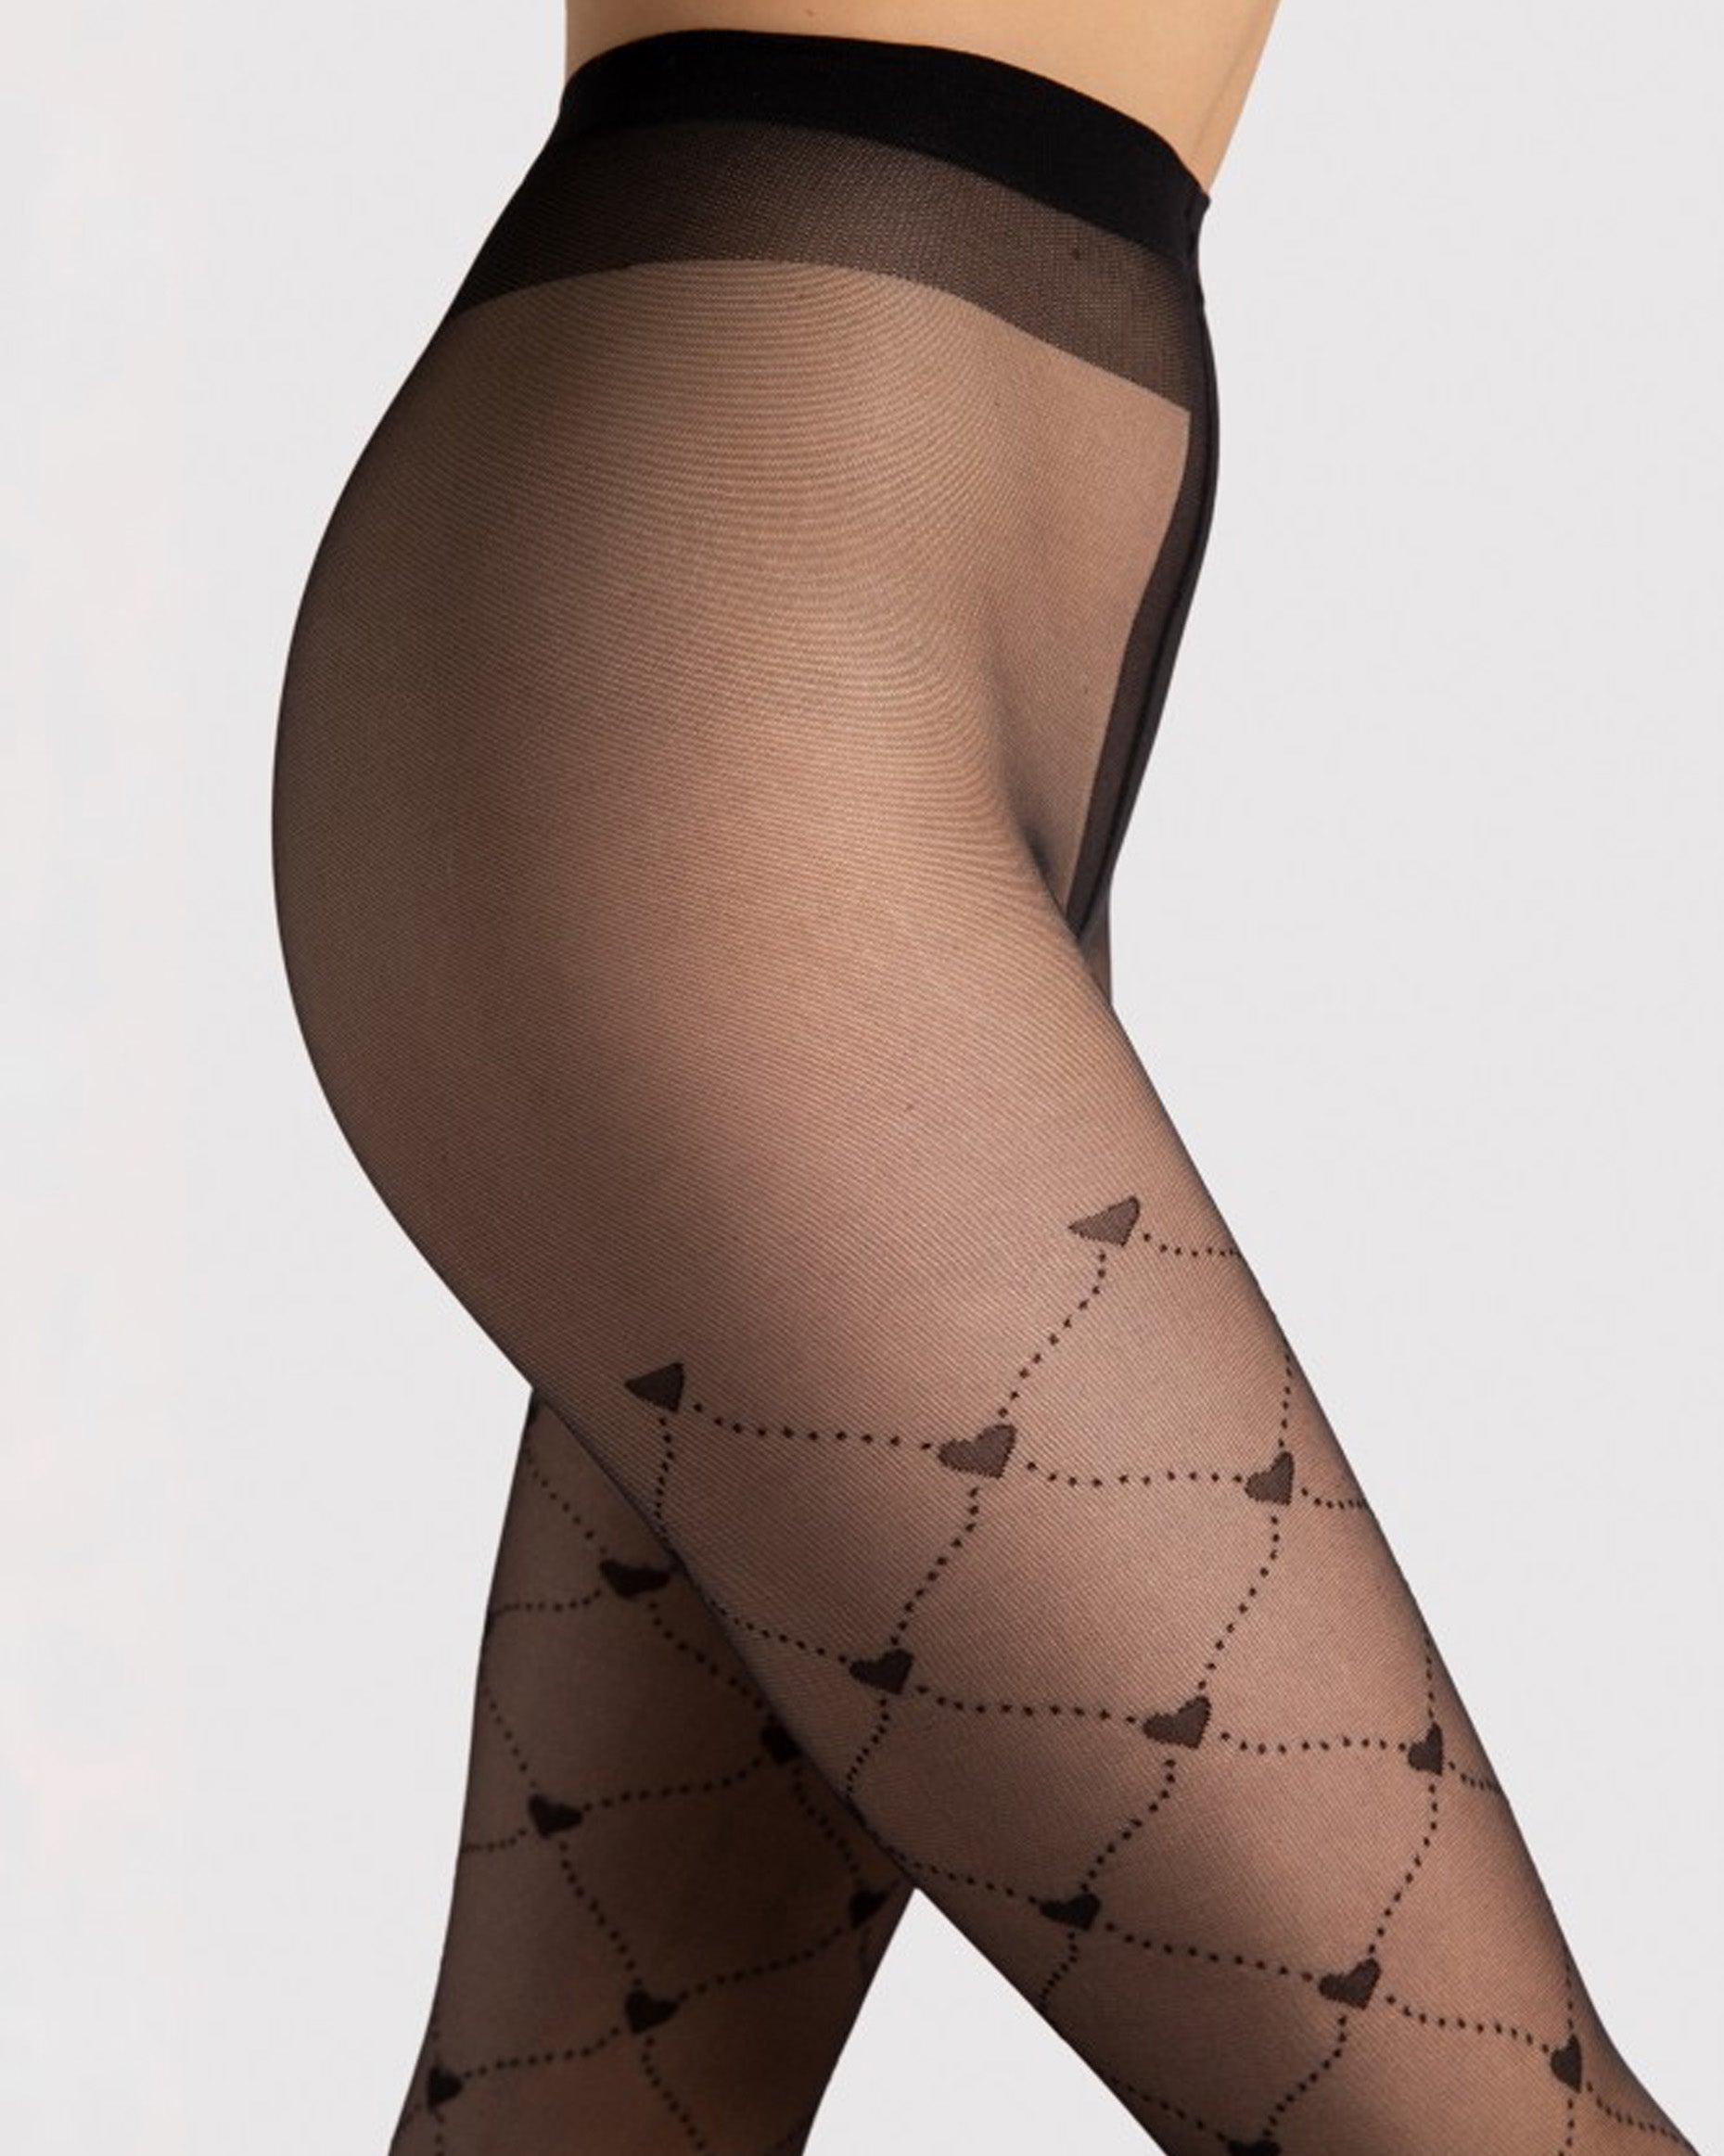 Sheer black fashion tights waist band detail  with a large light dotted fence fishnet style pattern with hearts.